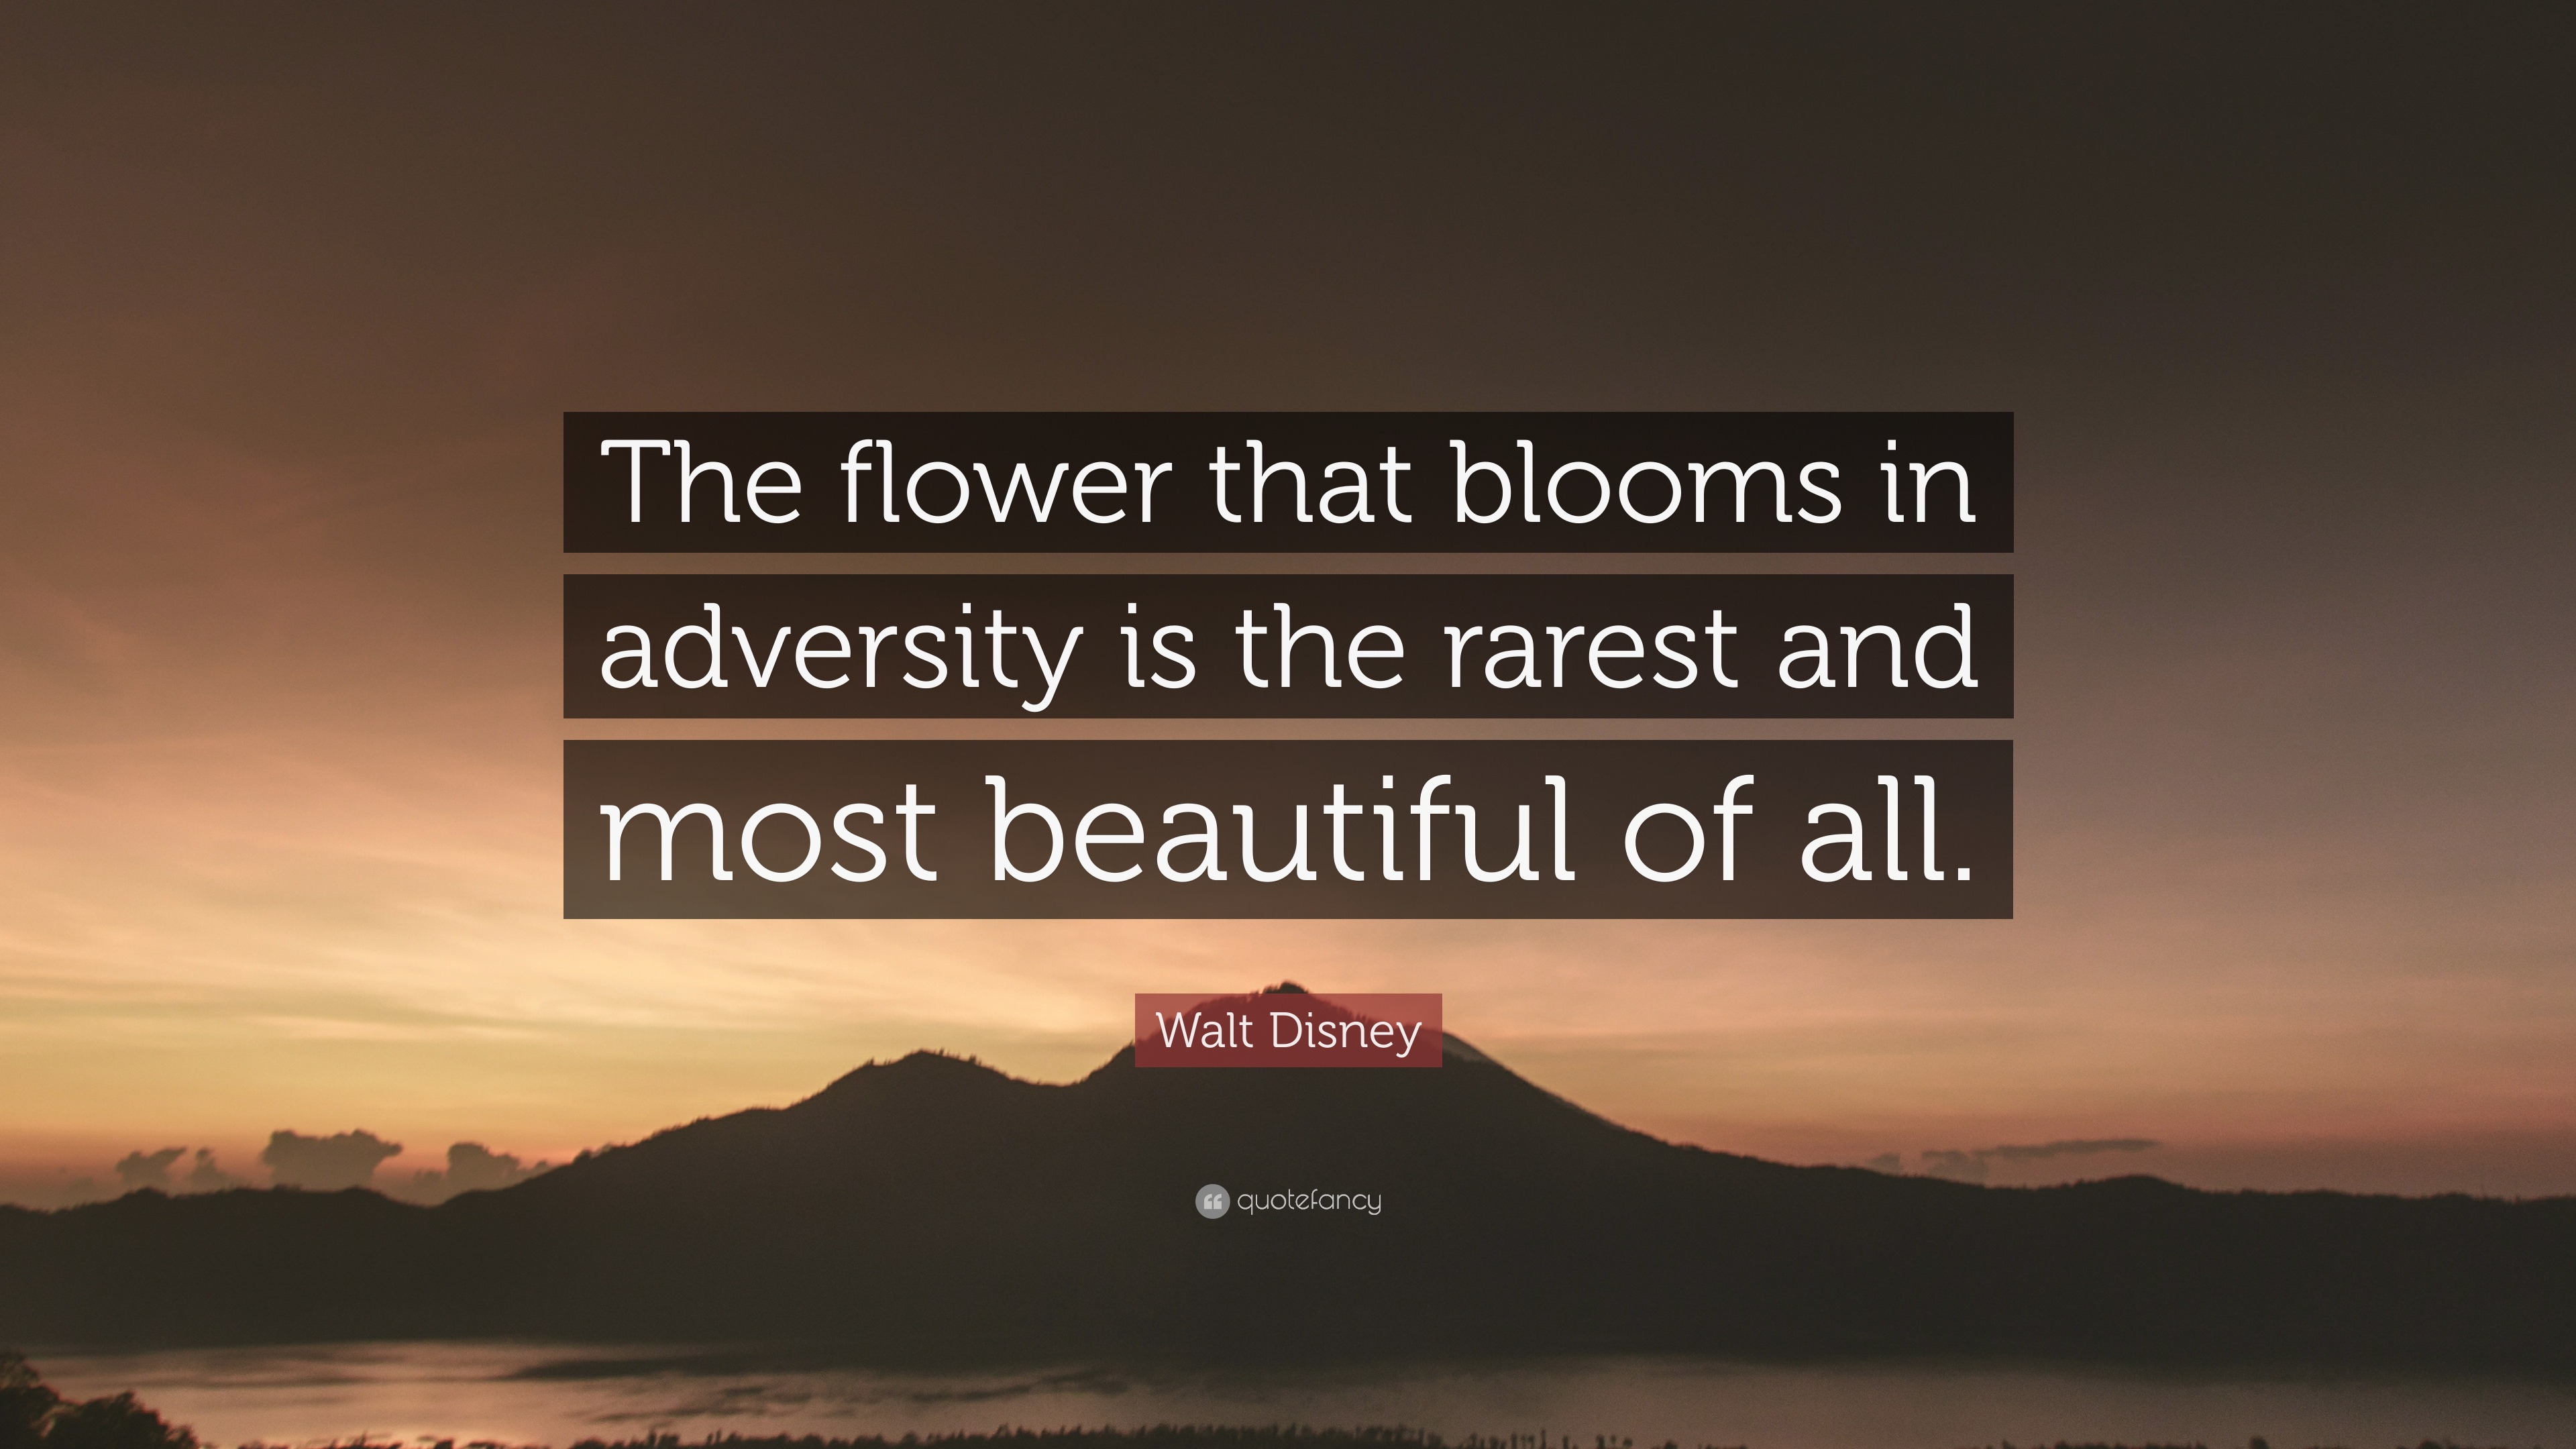 Walt Disney Quote: “The flower that blooms in adversity is the rarest ...